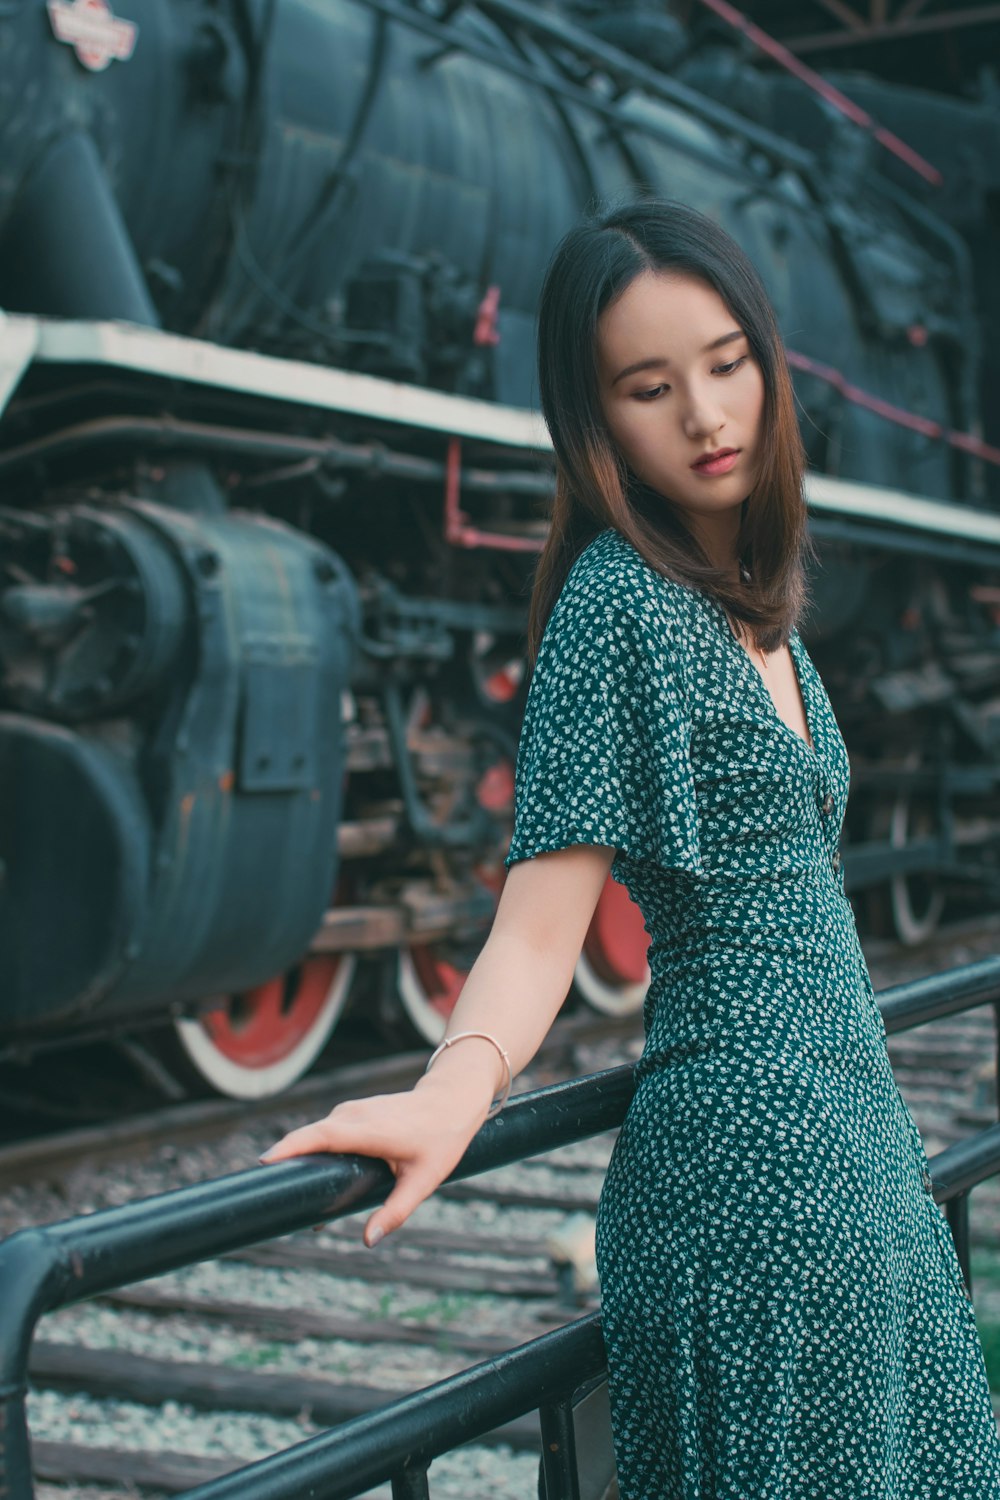 woman in blue and white polka dot dress standing on train rail